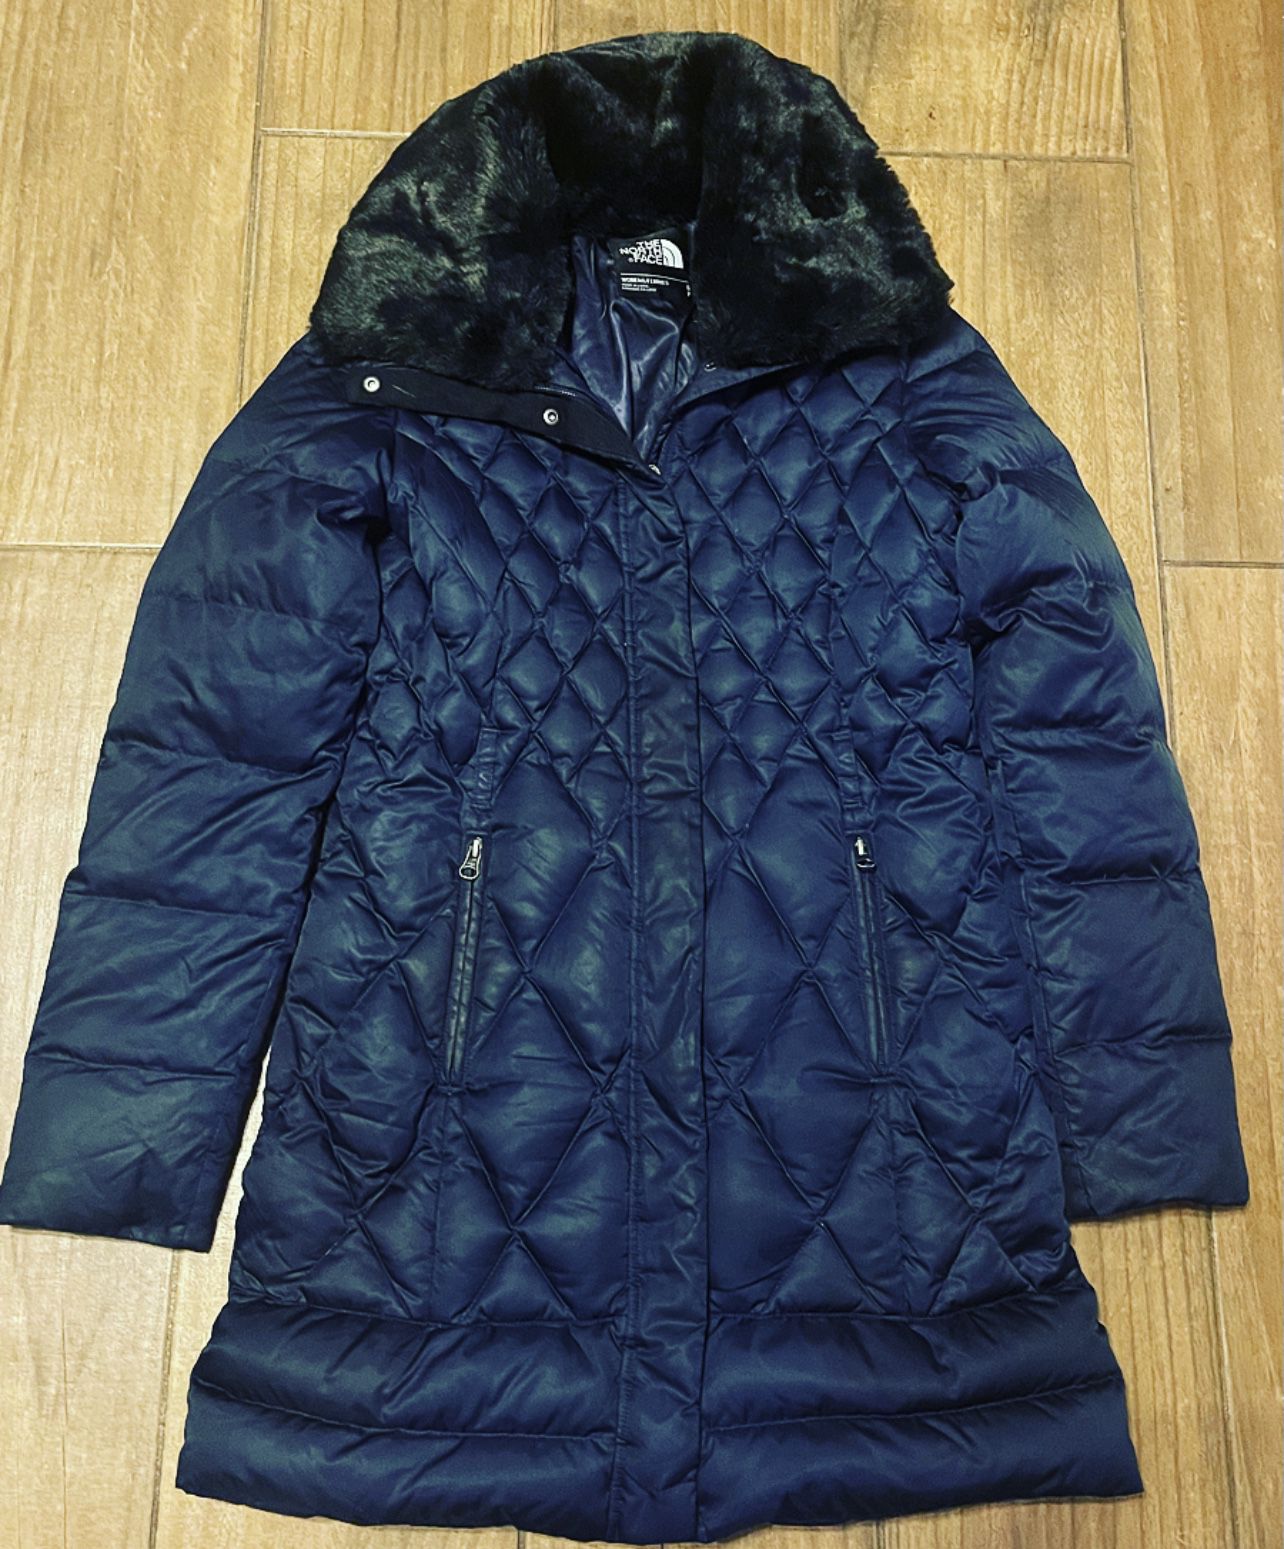 The North Face Women's Blue Parka with Black fur